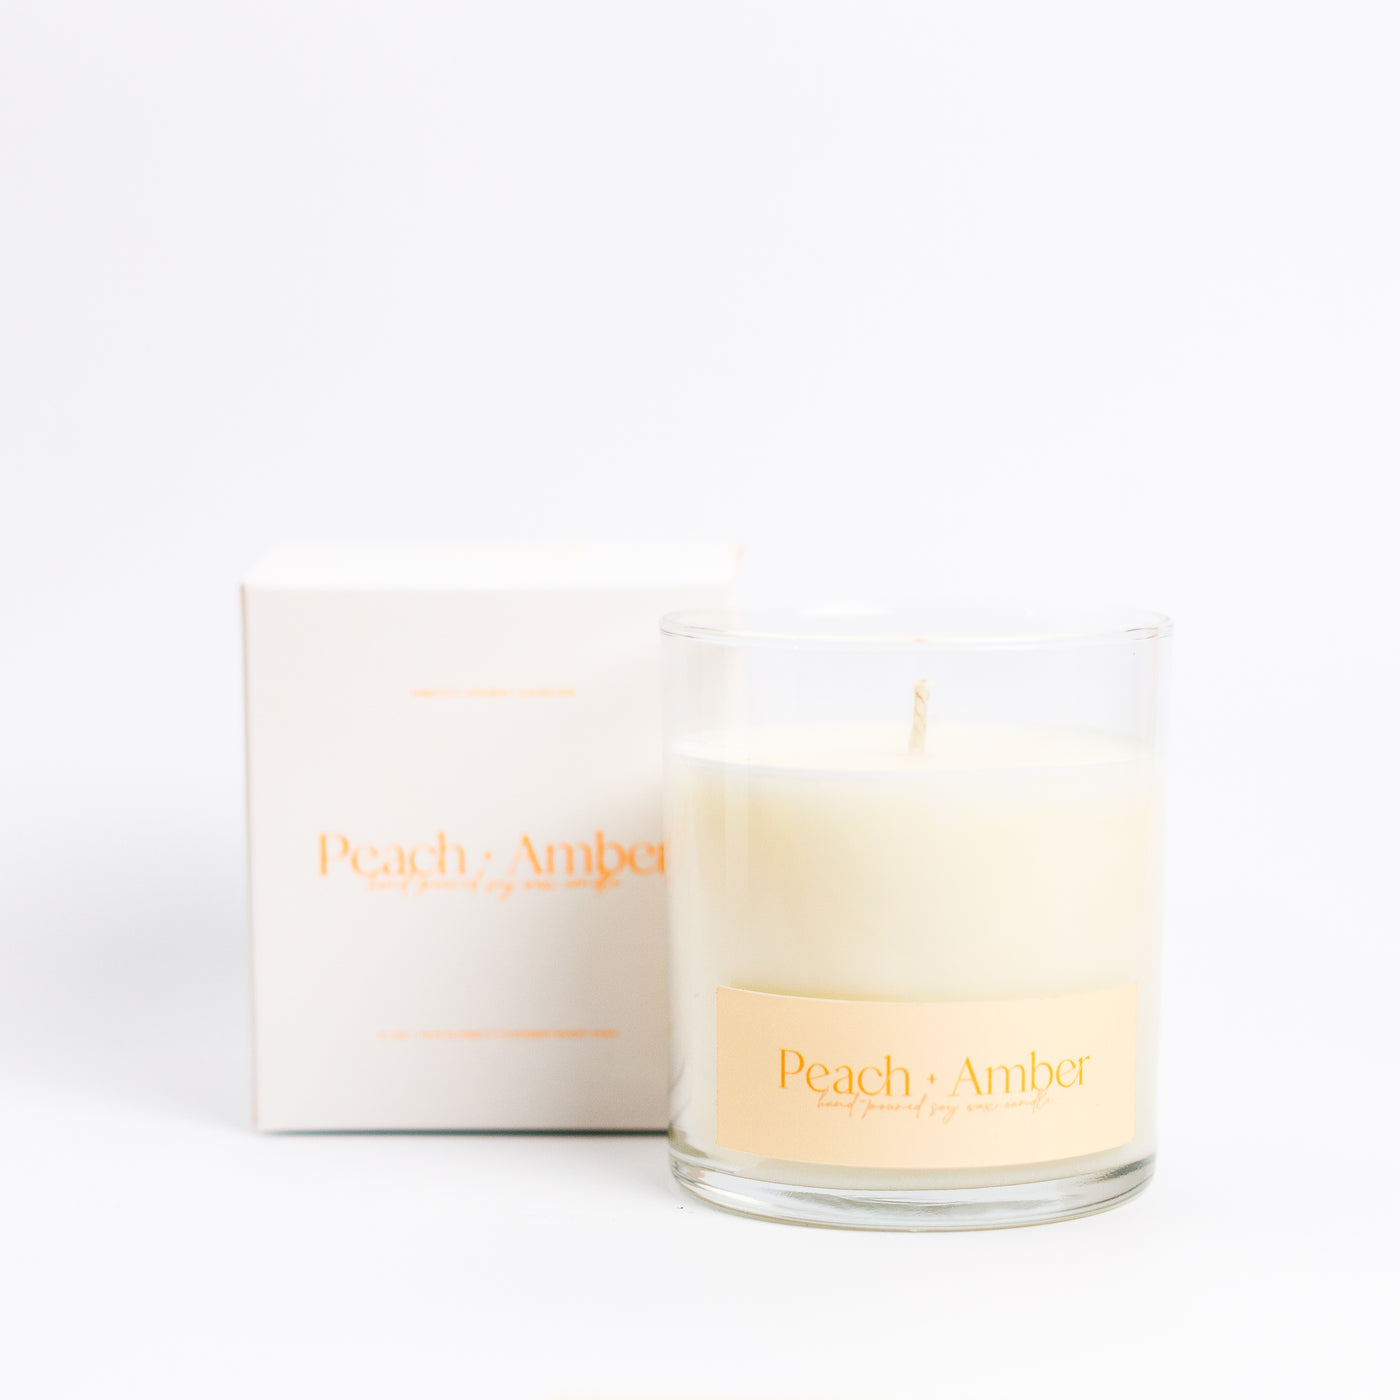 Peach + Amber Soy Candle